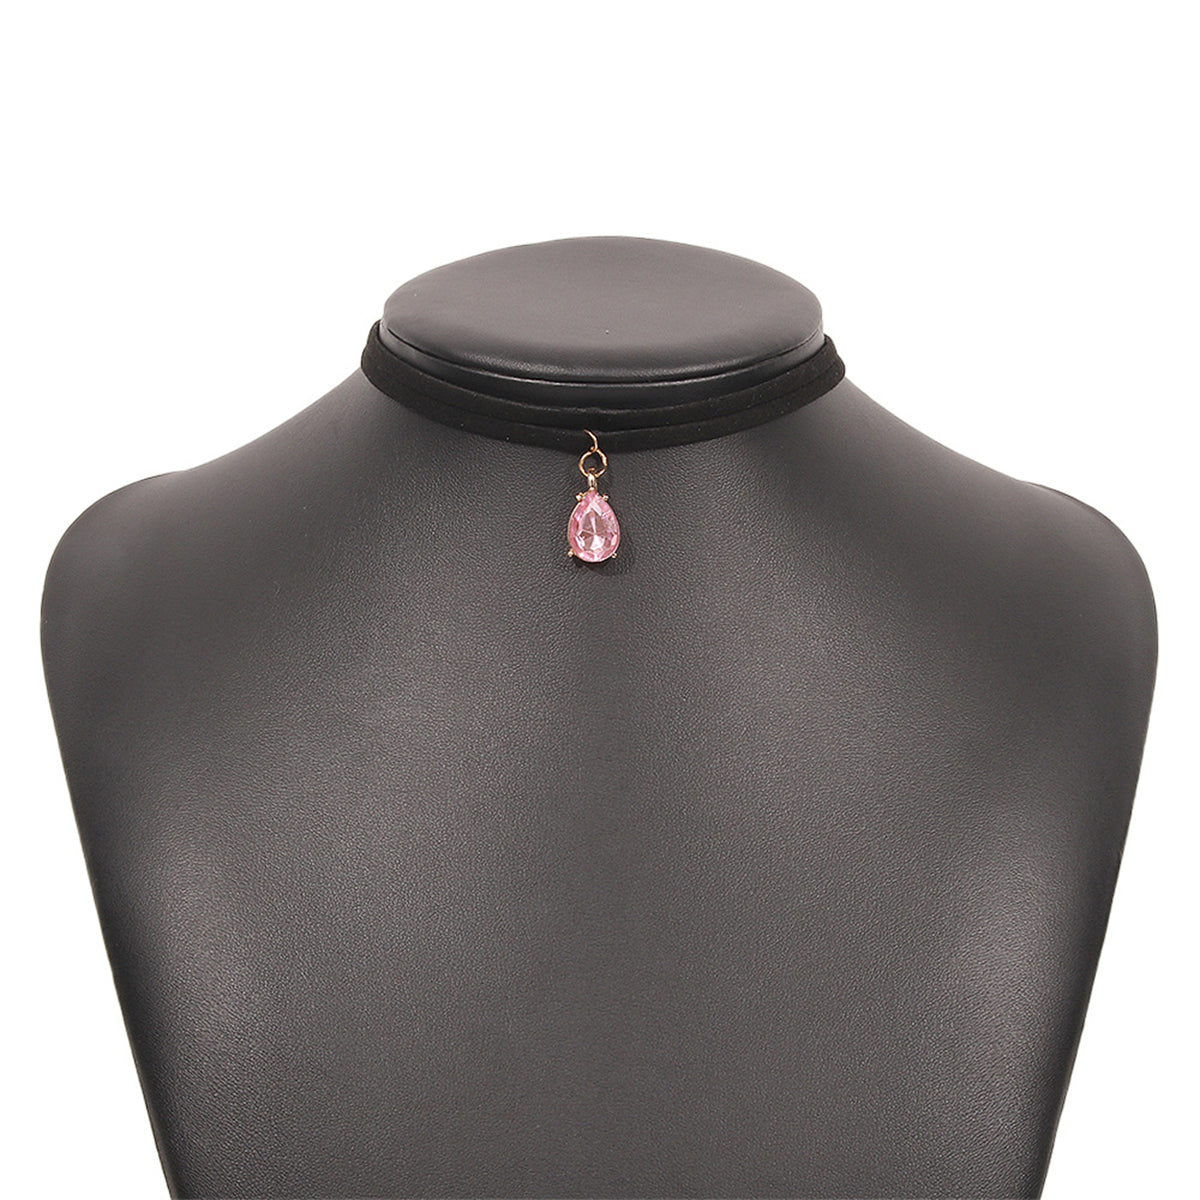 Pink Crystal & 18K Gold-Plated Layered Choker Necklace